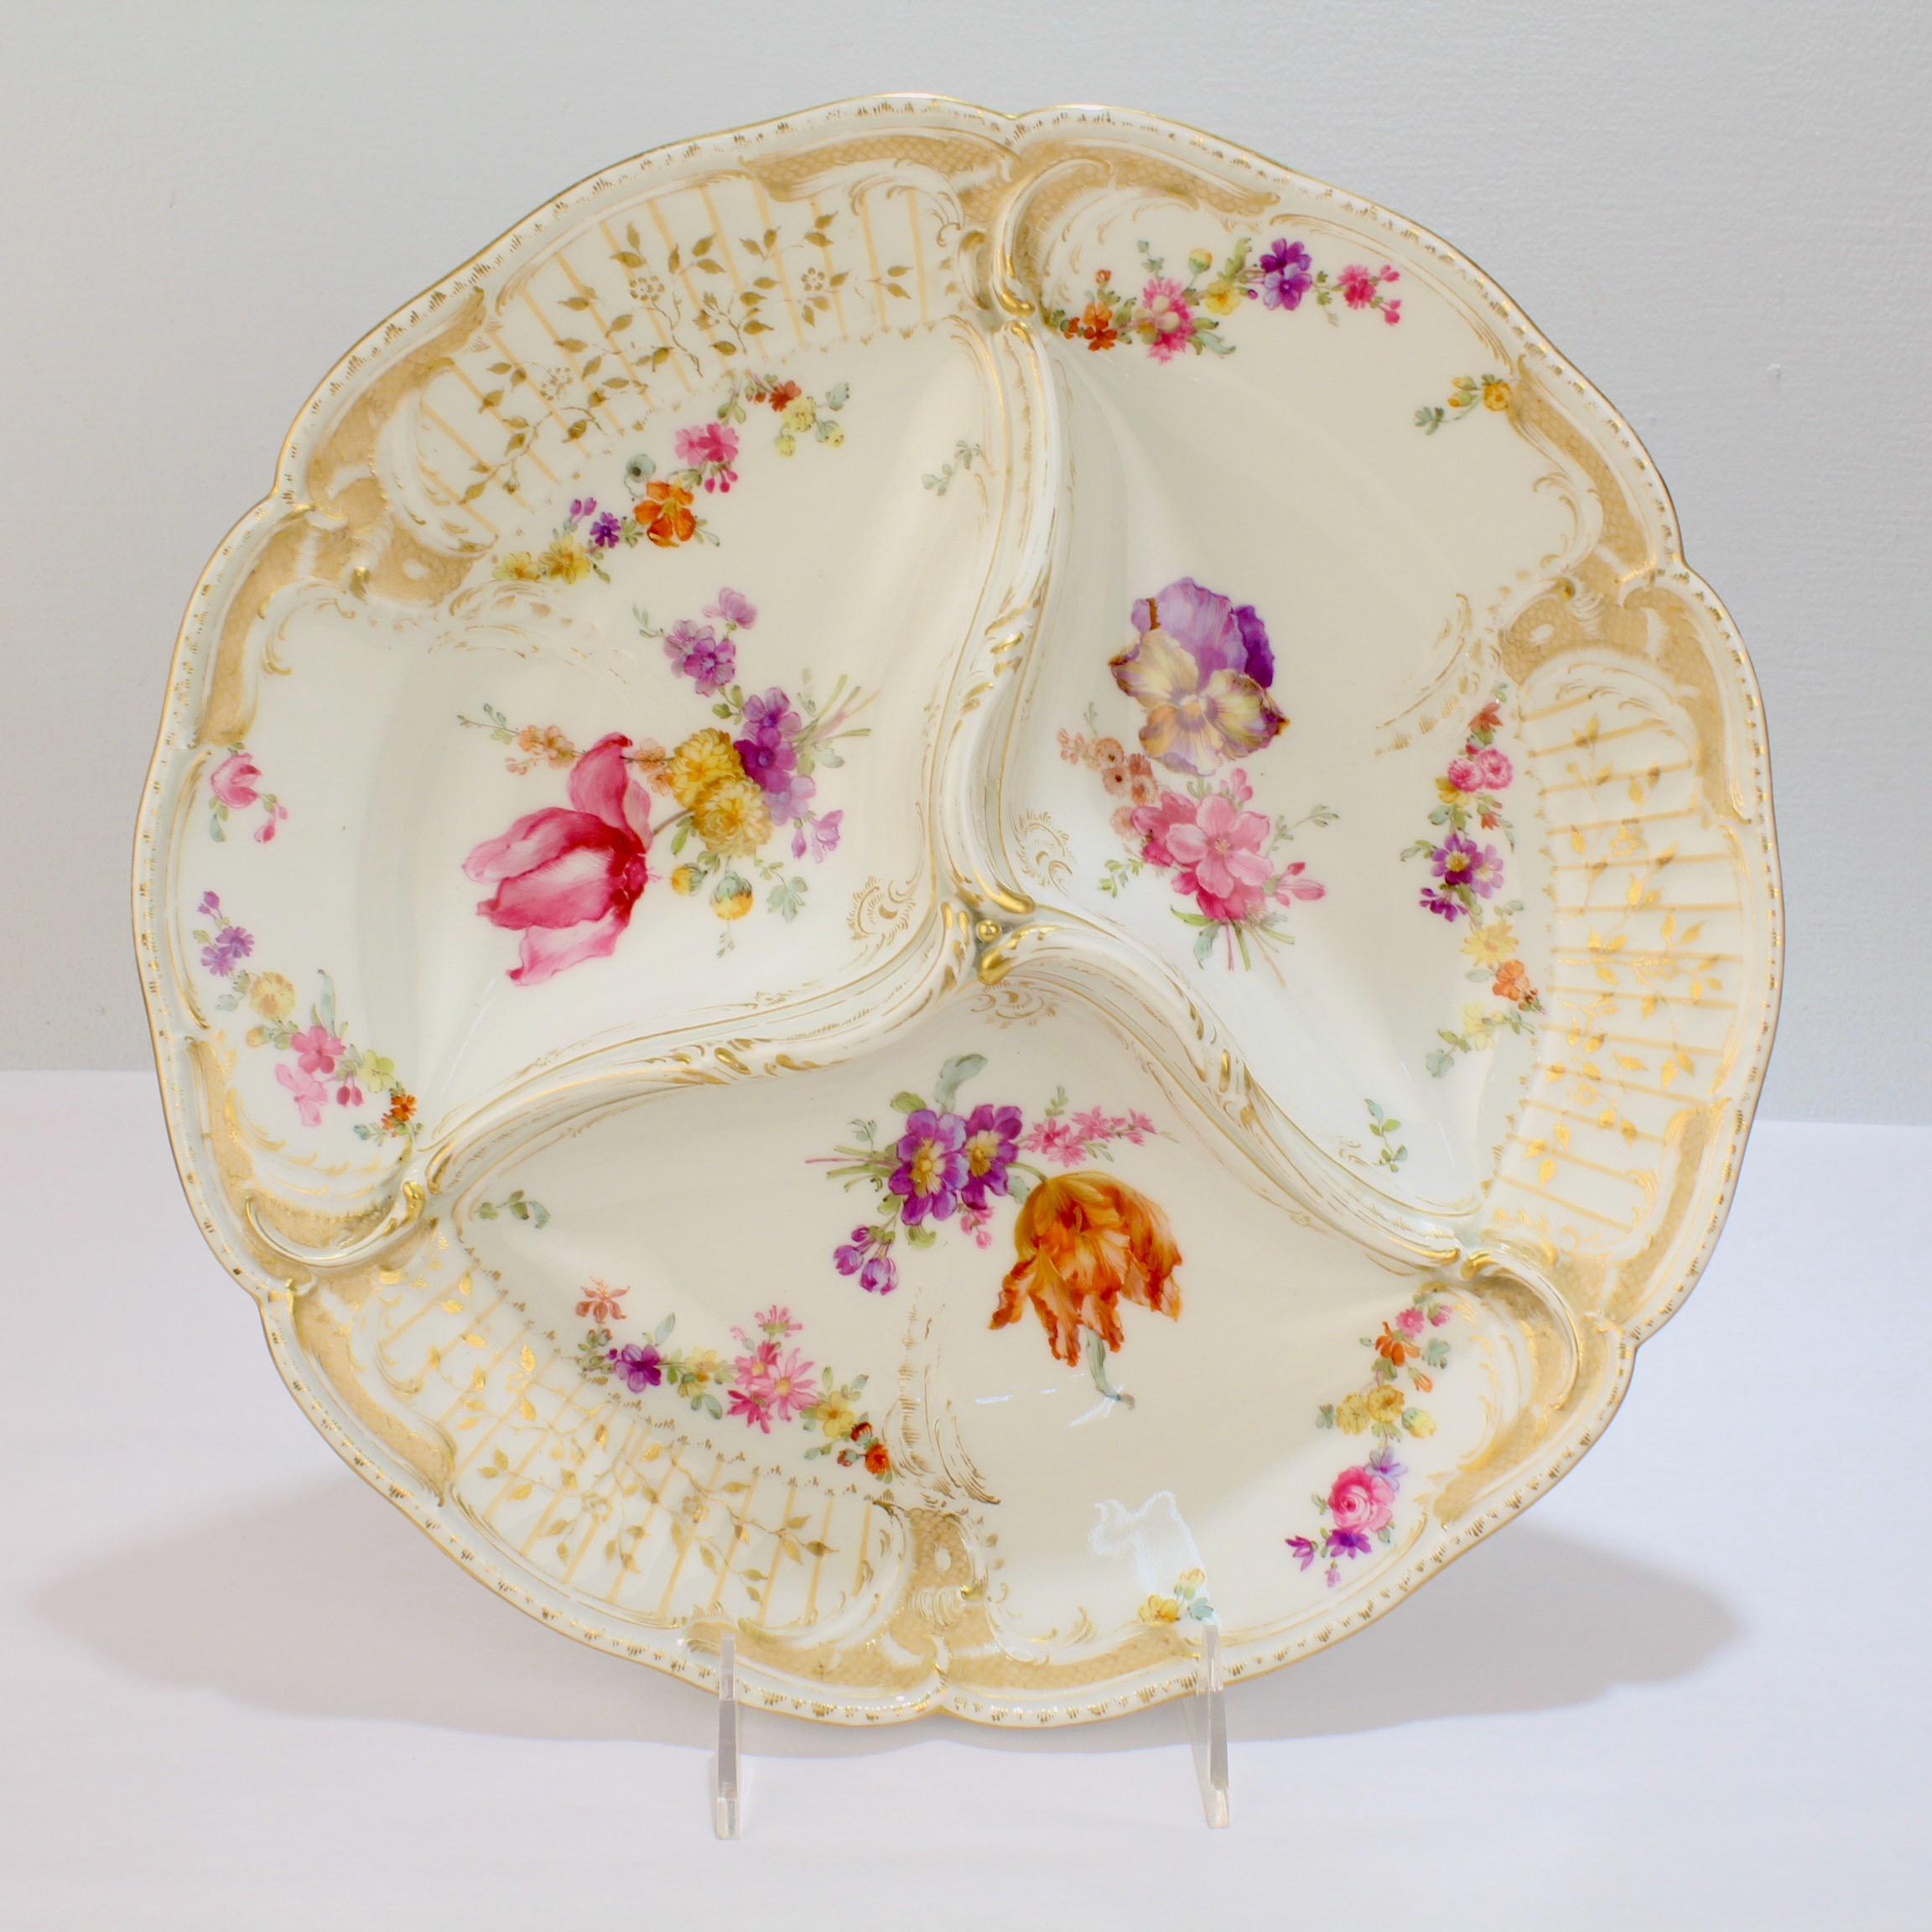 A very fine divided porcelain dish in the Reliefzierat pattern.

By the K.P.M. Royal Berlin Porcelain Manufactory. 

Modeled after the services supplied to Frederick the Great of Prussia for his Potsdam palace.

With a three-part divided center,